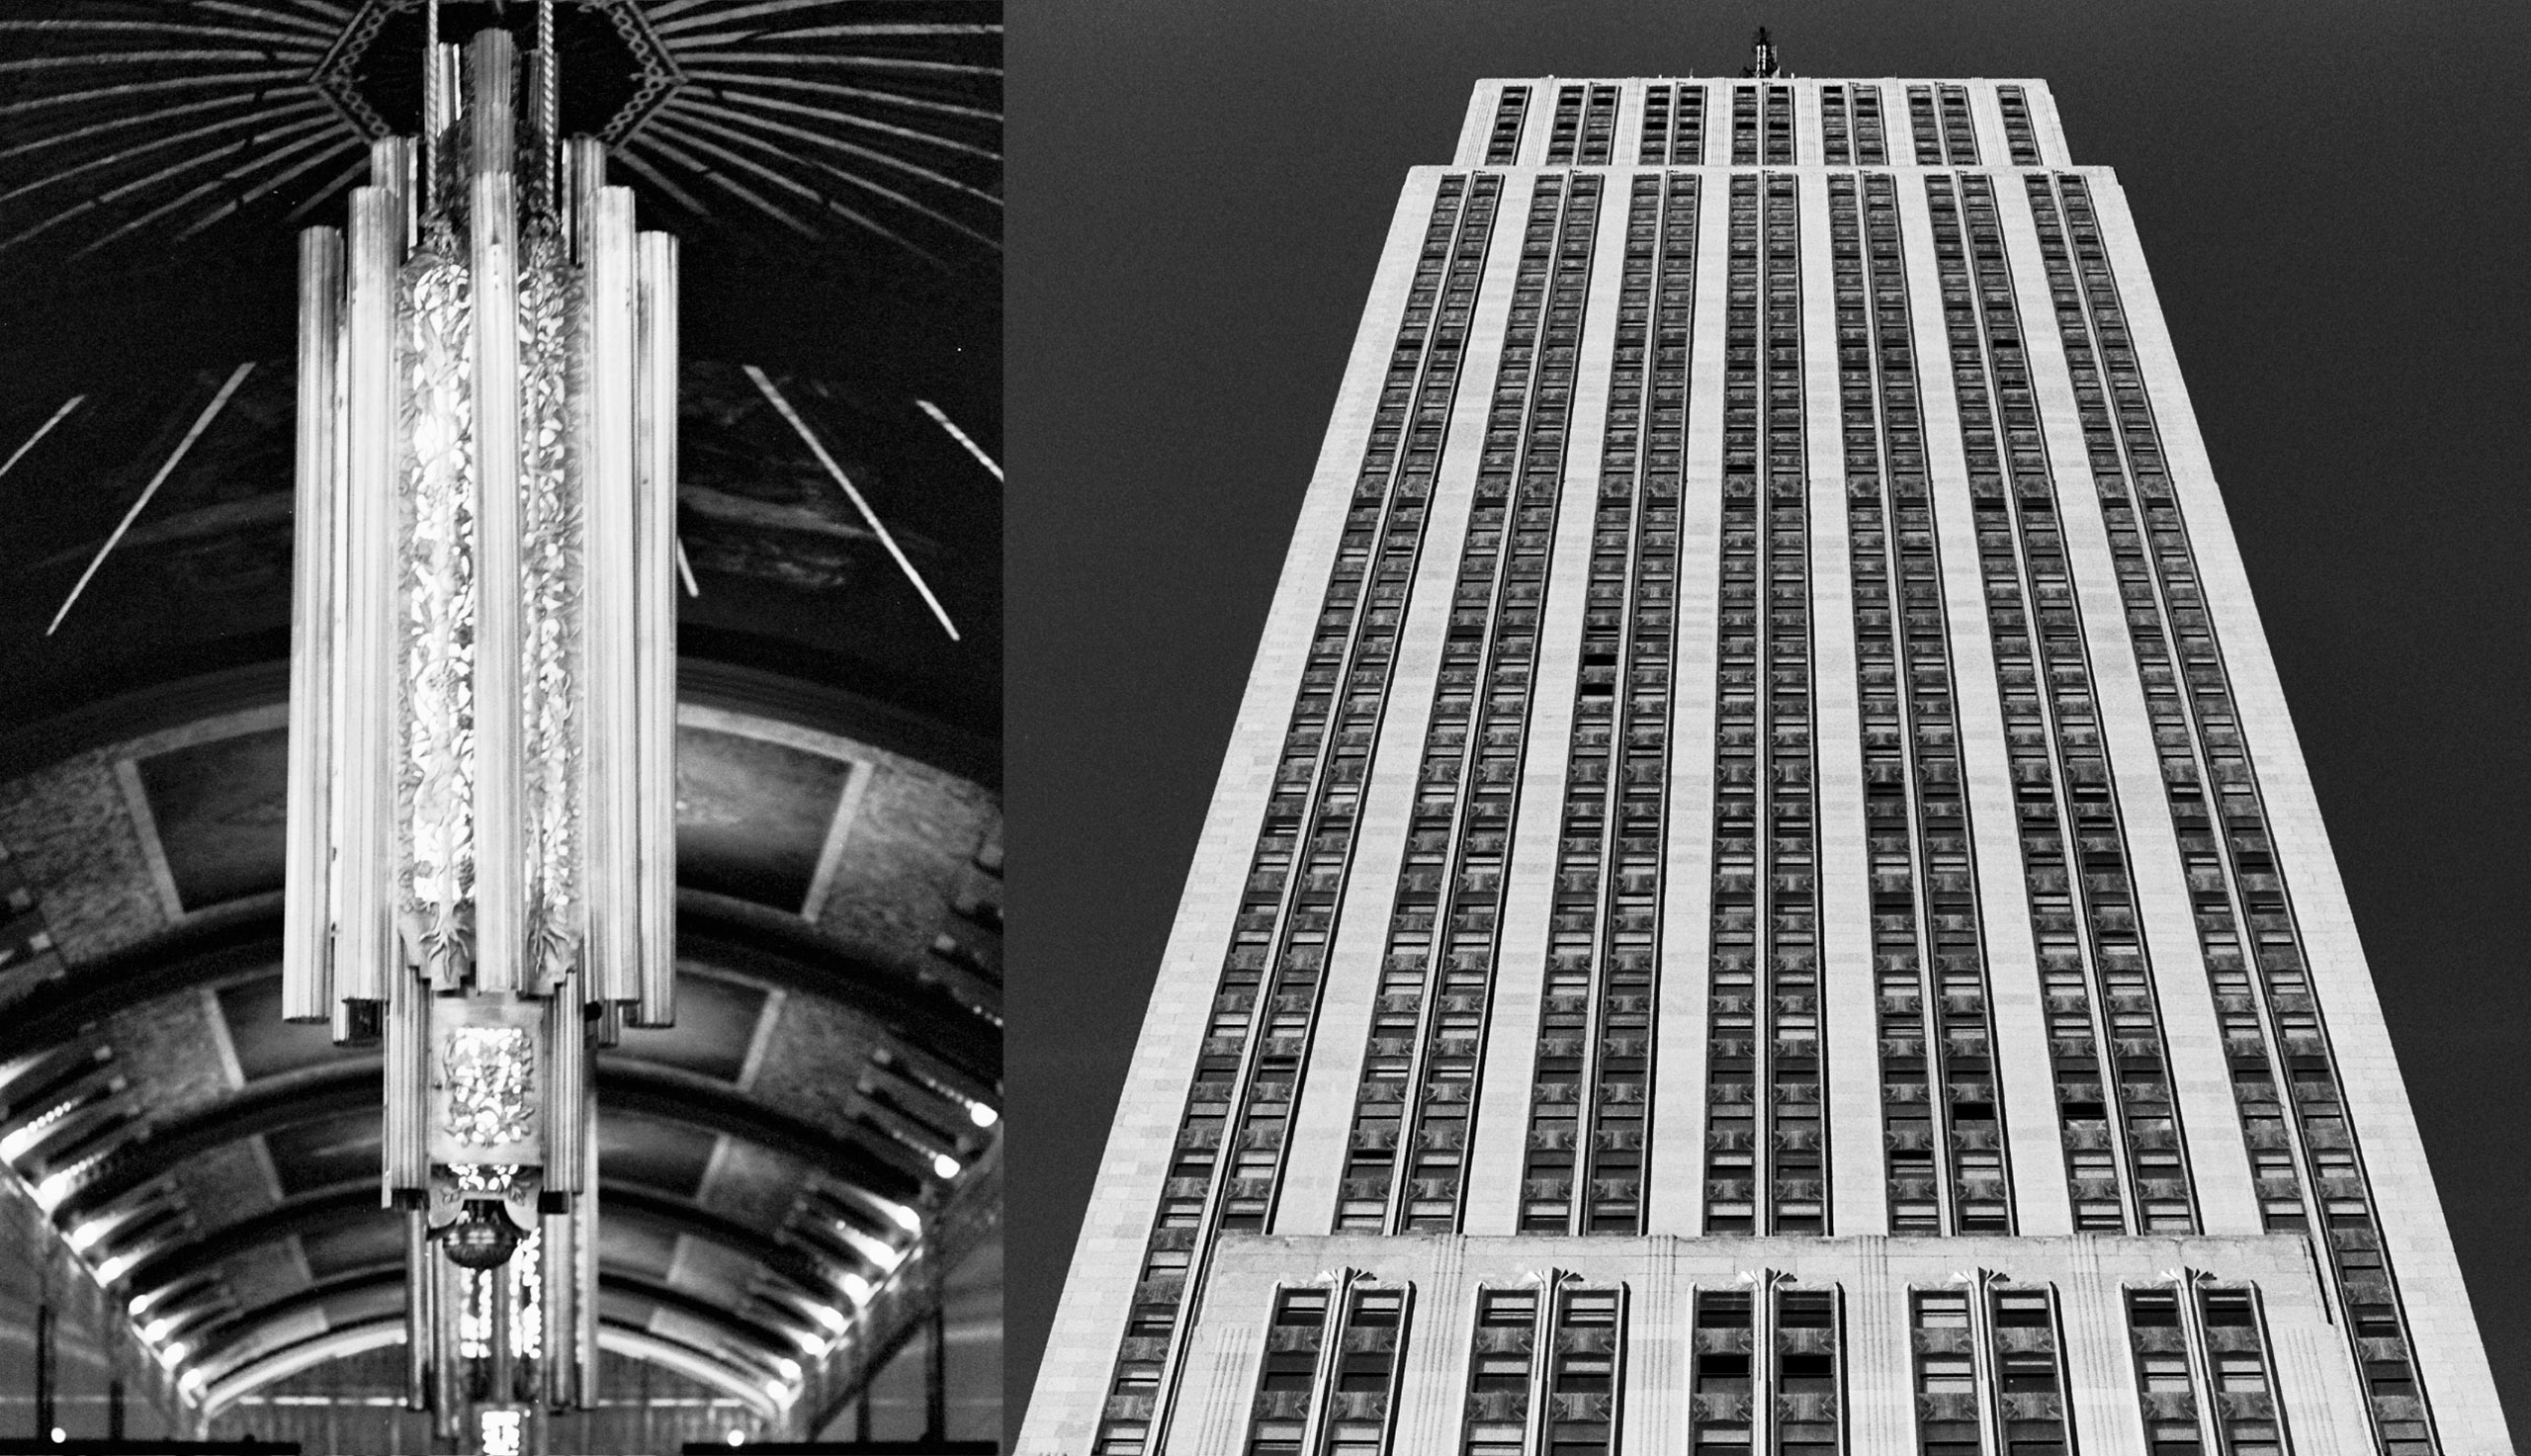 Left: Chandeliers inside the lobby at 100 Barclay. Right: the Empire State Building